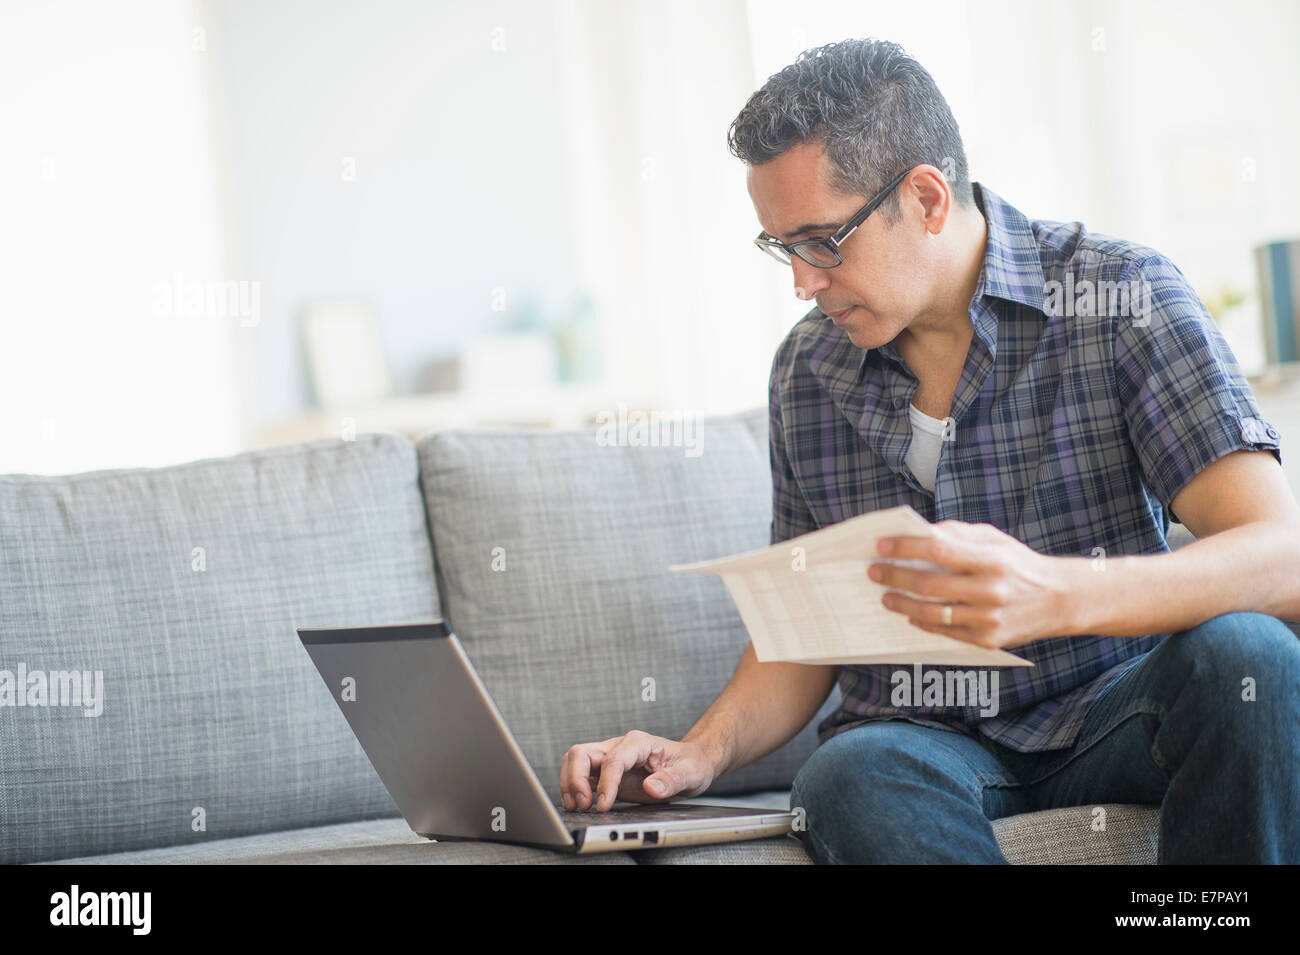 Man doing home finances with laptop Stock Photo